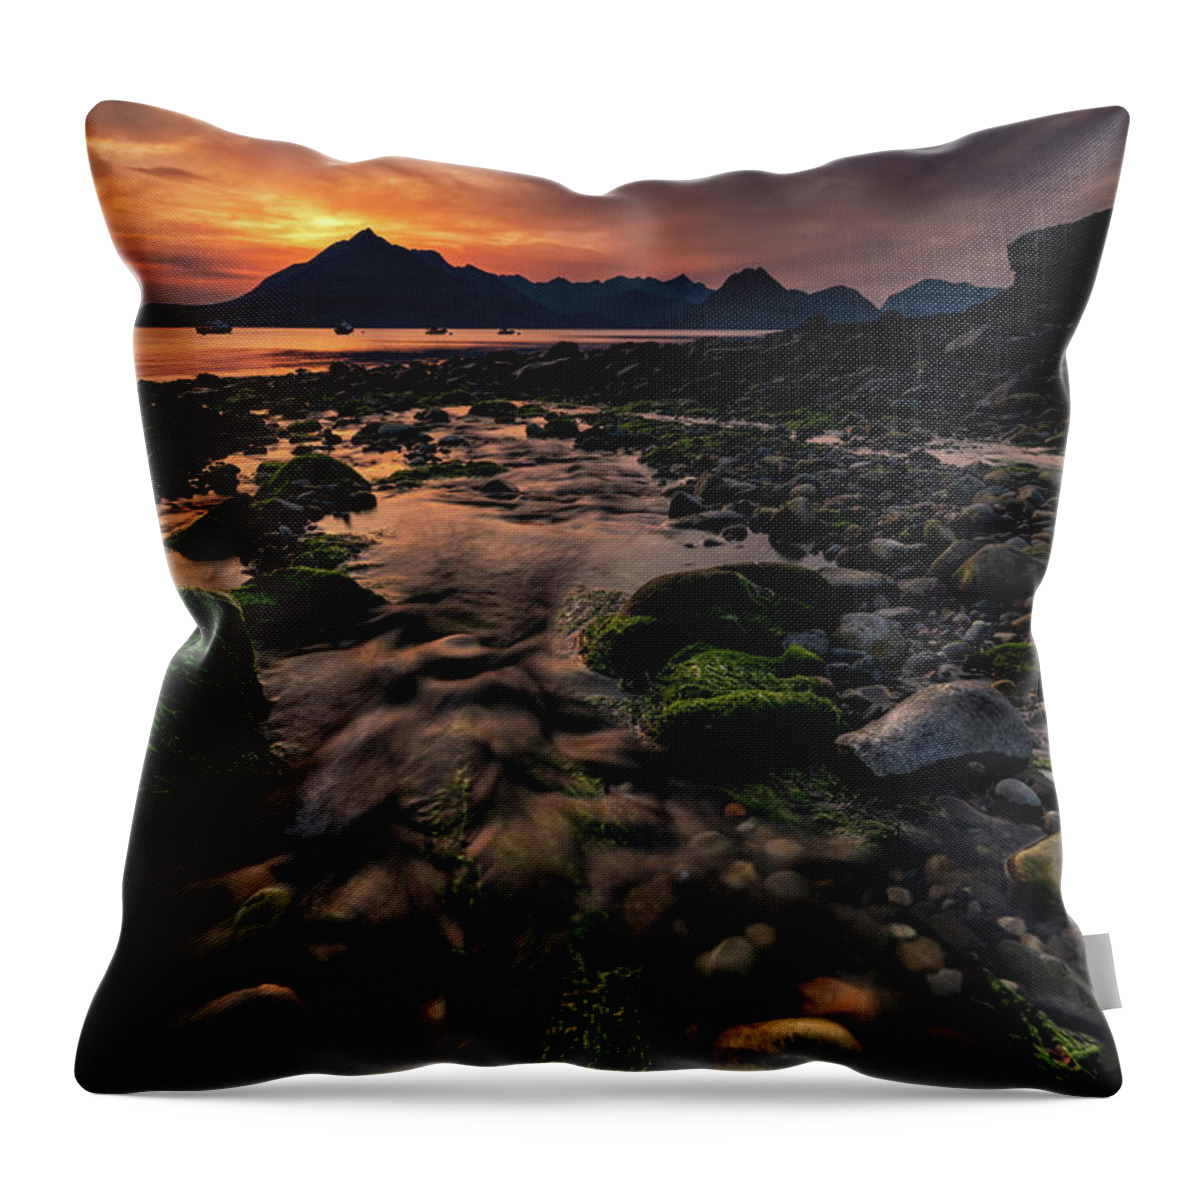 Sunset Throw Pillow featuring the photograph Changing Tide by Chuck Rasco Photography